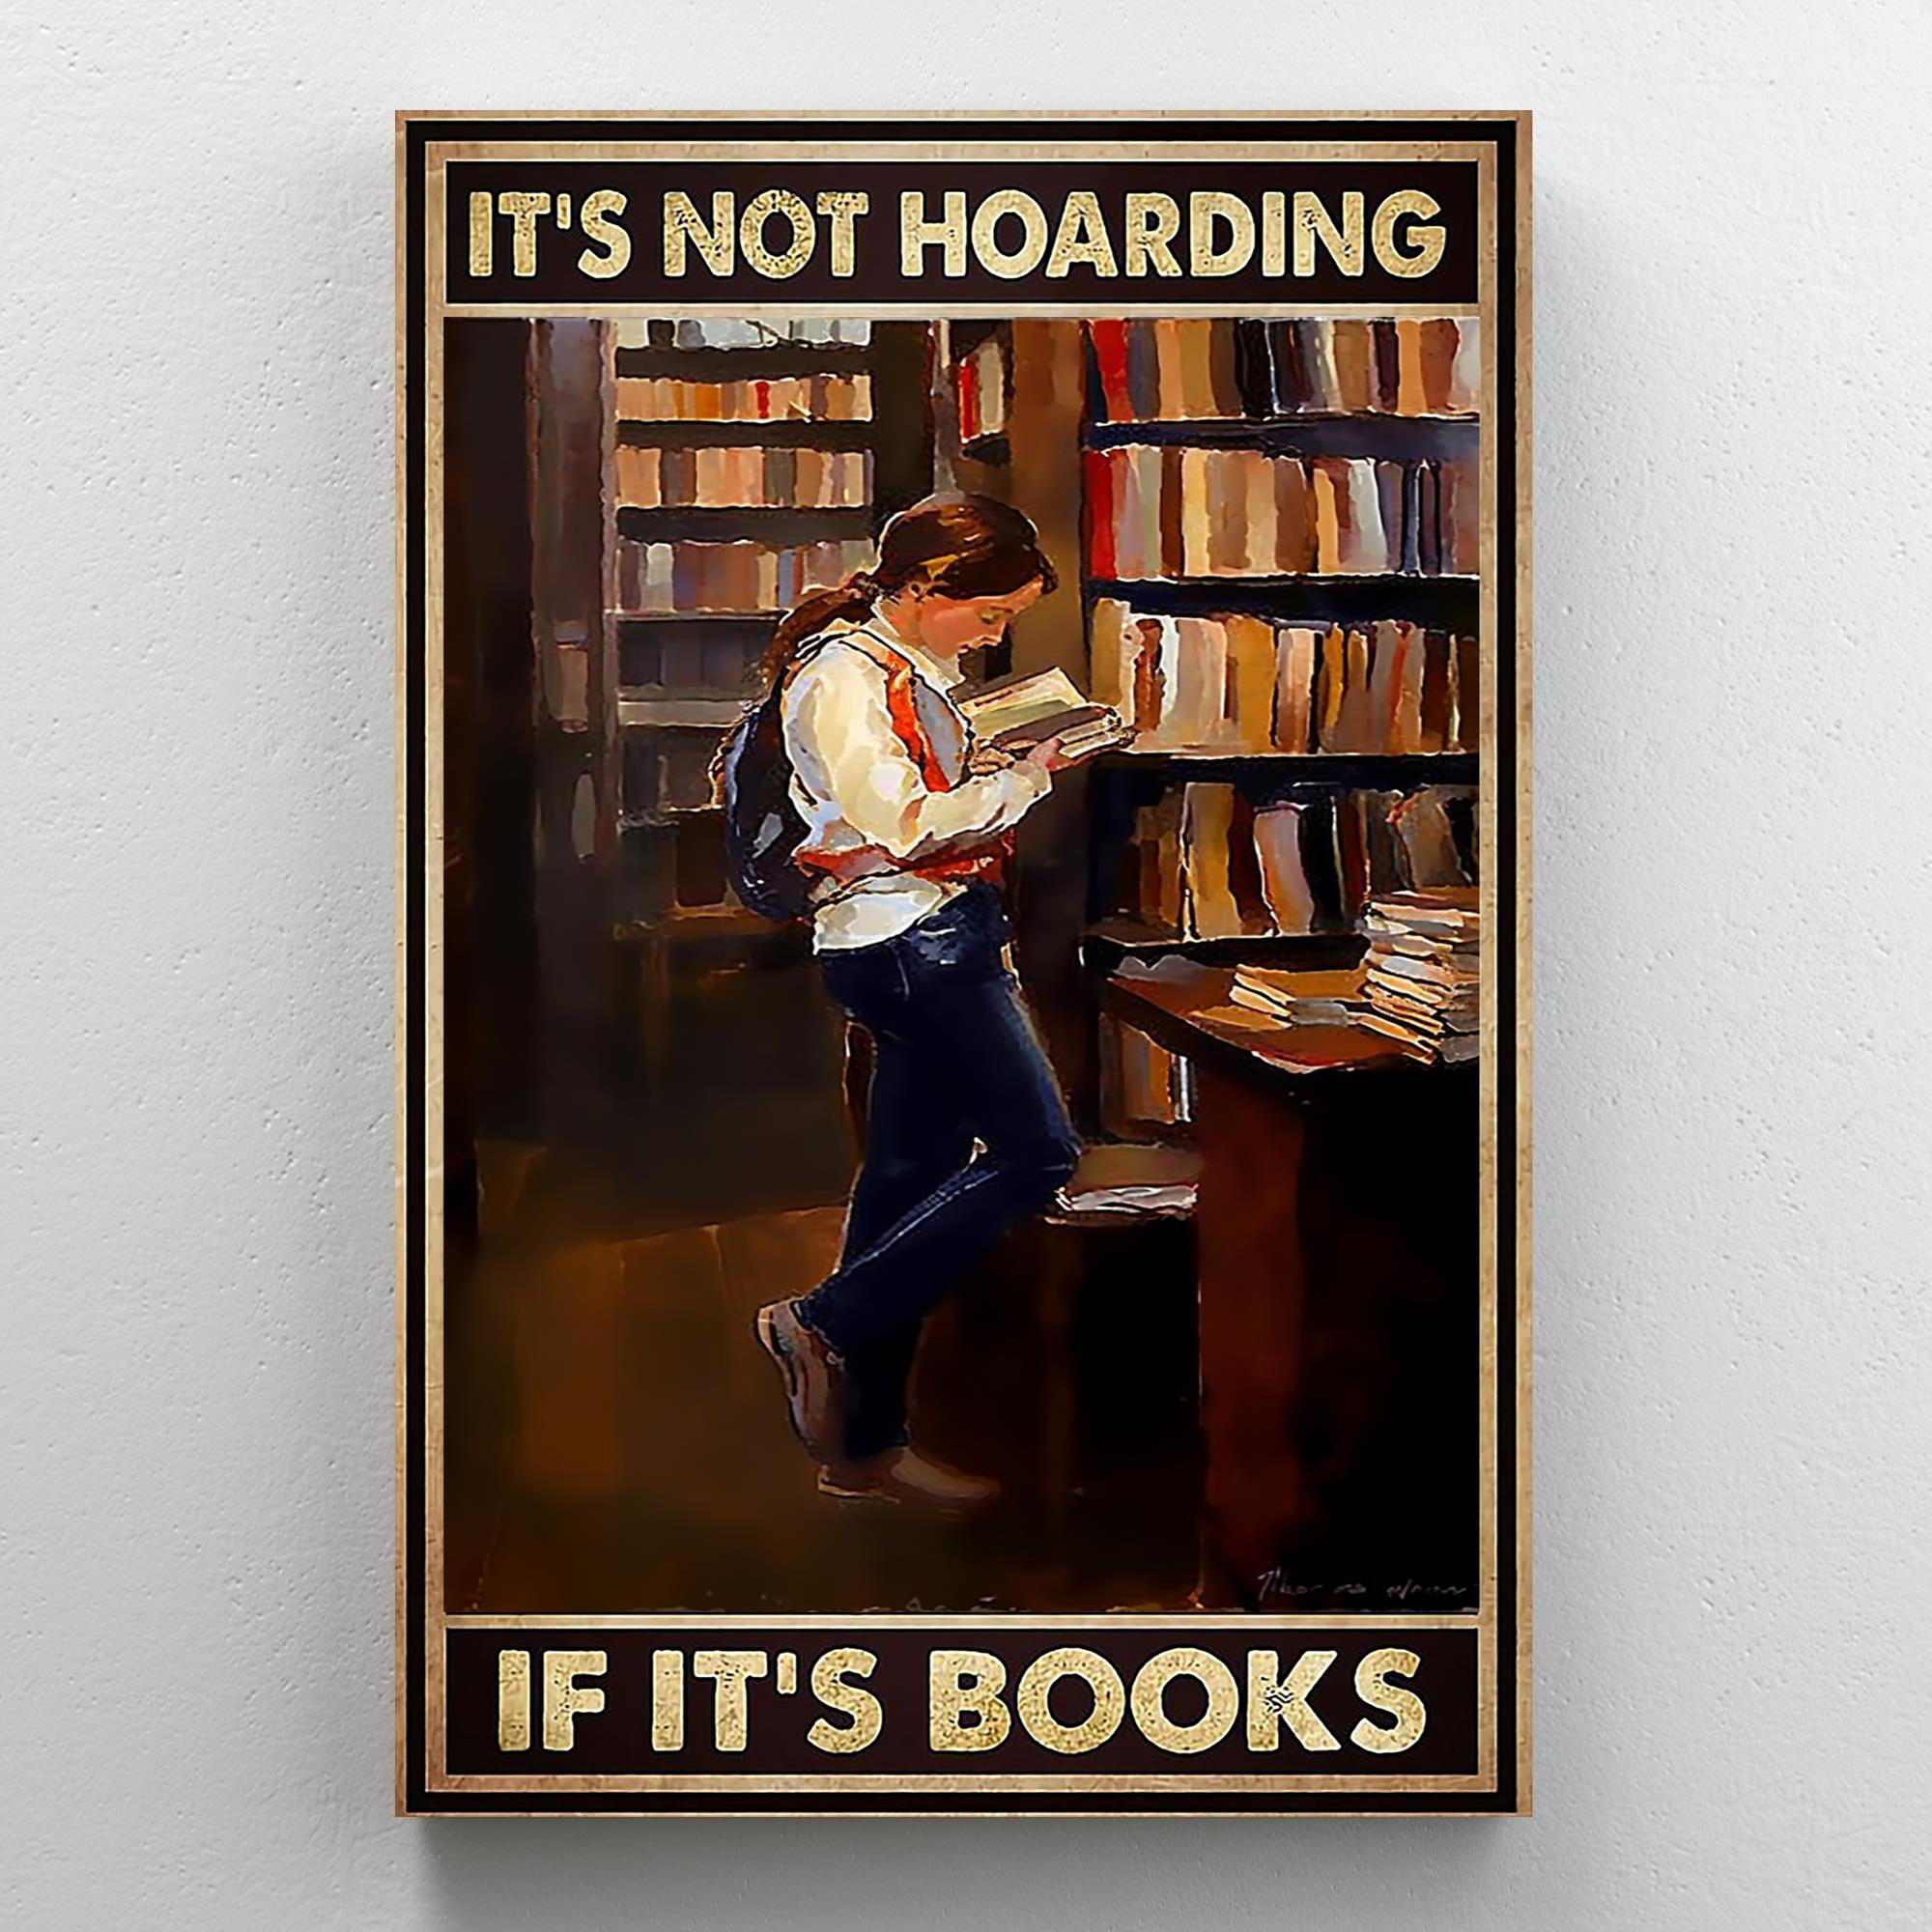 Its Not Hoarding If Its Books - 1 Piece Rectangle Its Not Hoarding If Its  Books - 1 Piece Rectangle Graphic Art Print On Wrapped Canvas